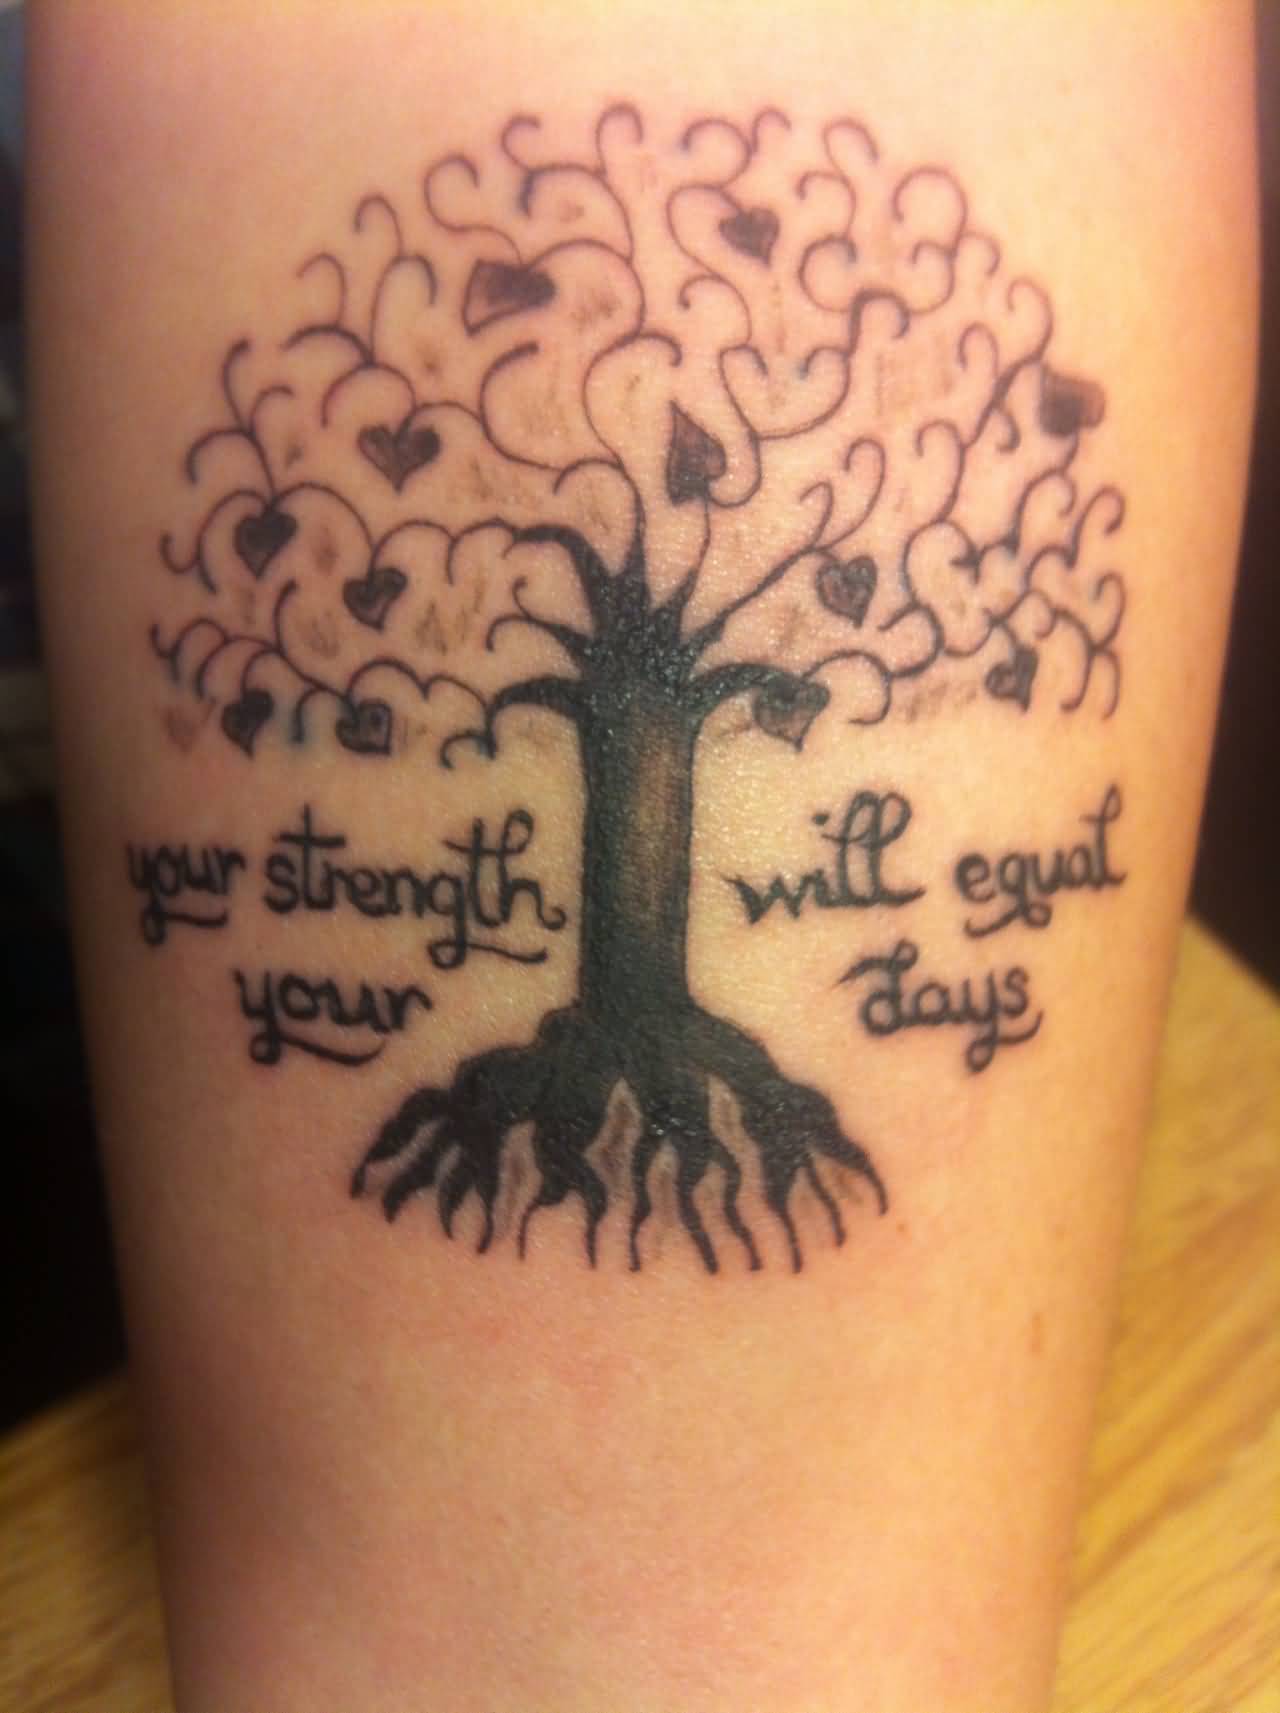 Your Strength Will Equal Your Days - Black Ink Tree Of Life Tattoo On Forearm